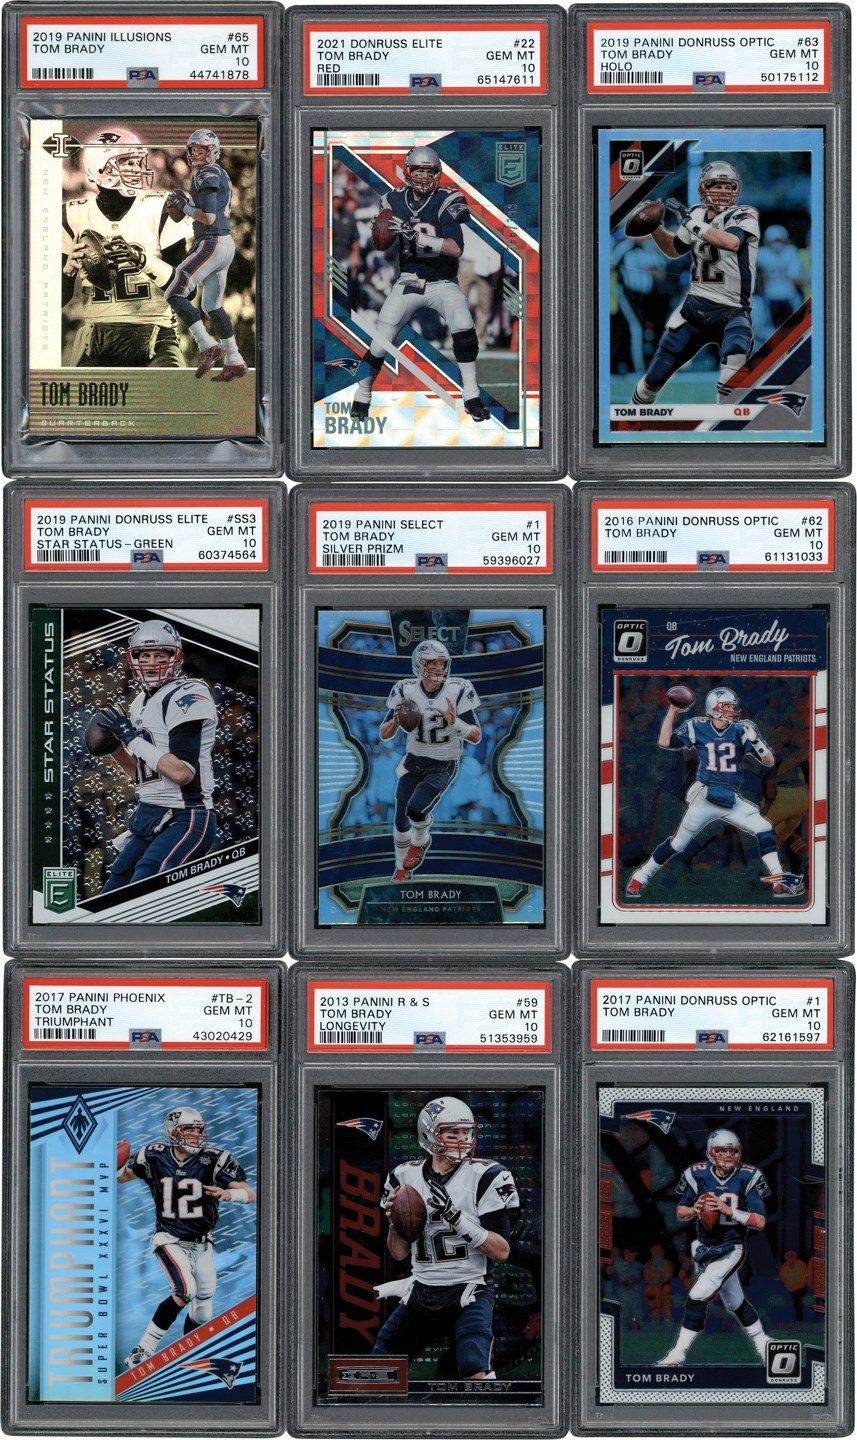 - 2012-2021 Panini Tom Brady PSA GEM MINT 10 Card Collection with Select Silver Prizm and Inserts (32)